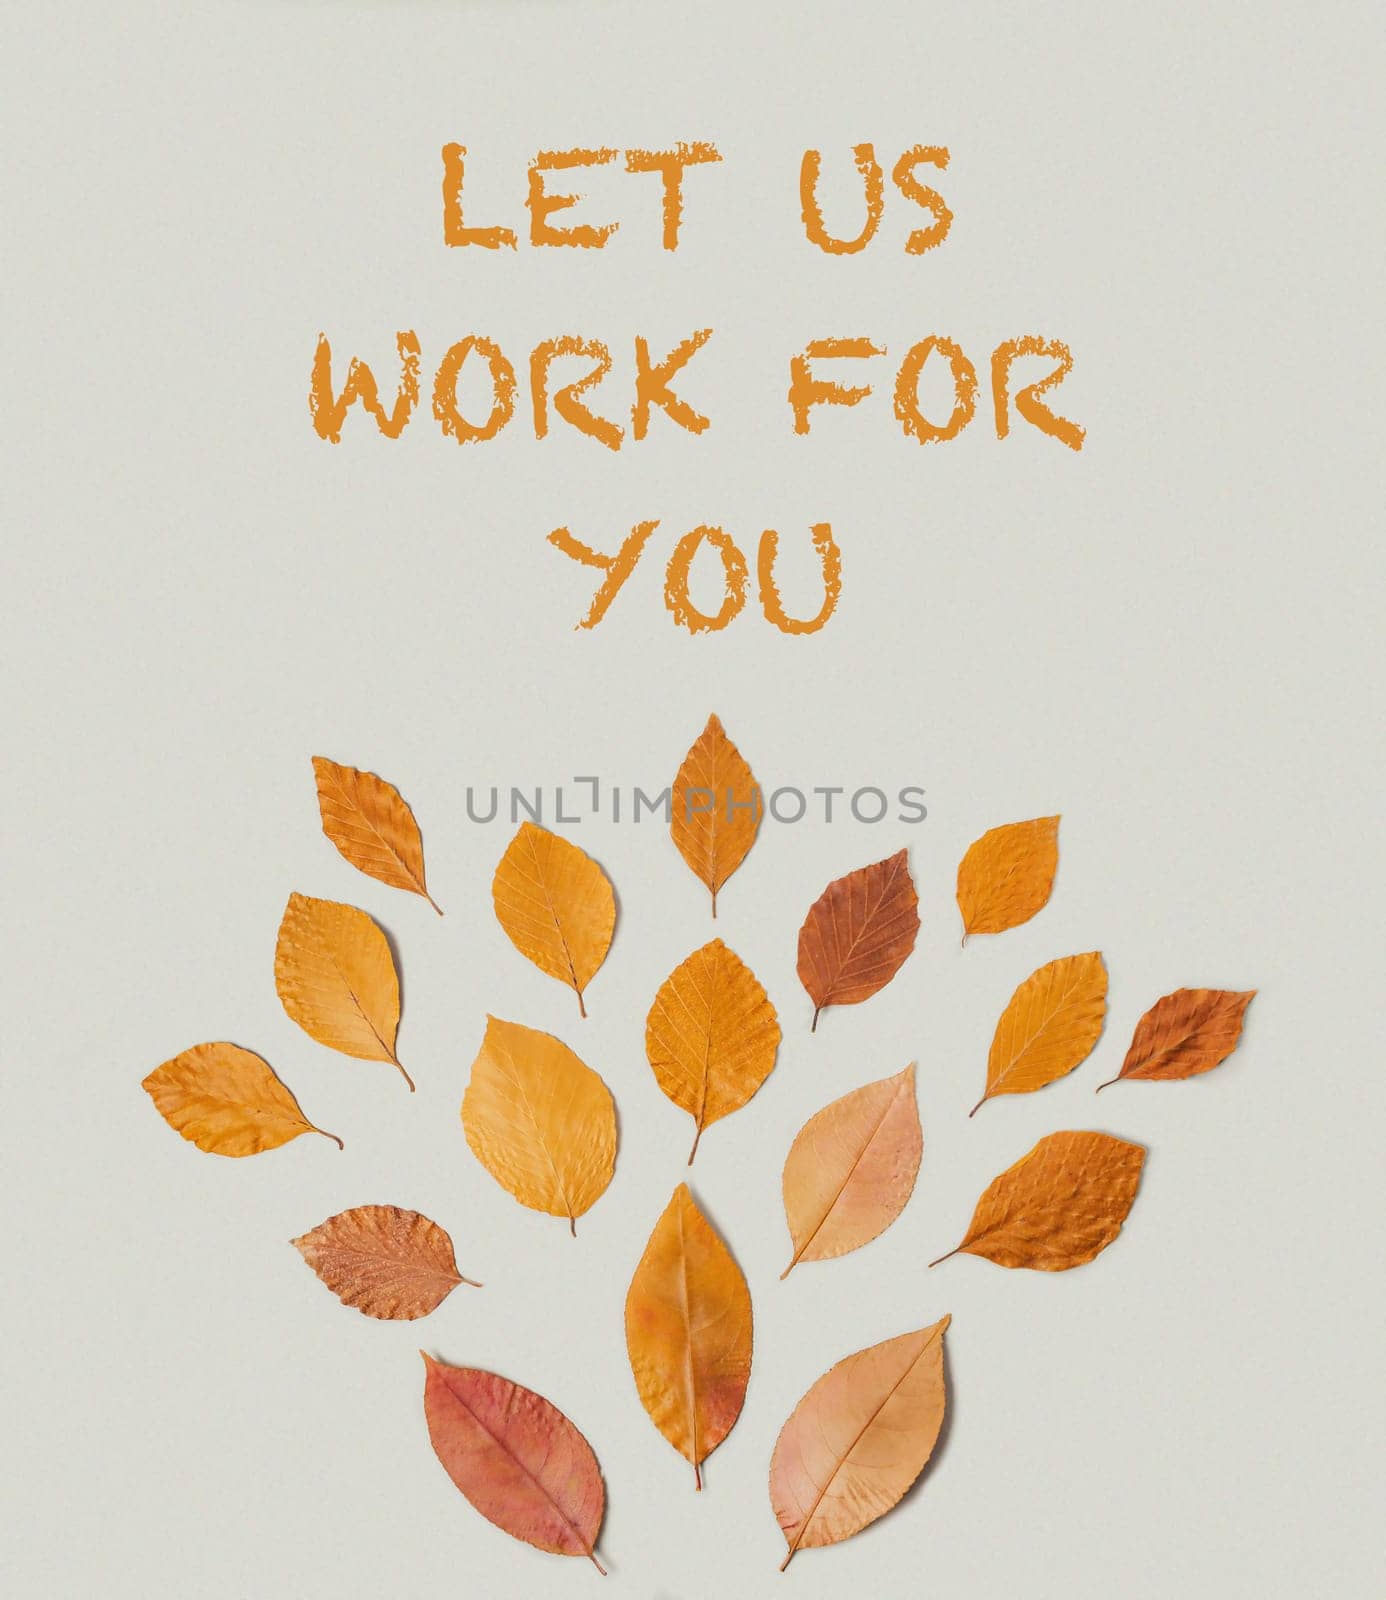 A poster with leaves and the words "Let us work for you" by Alla_Morozova93